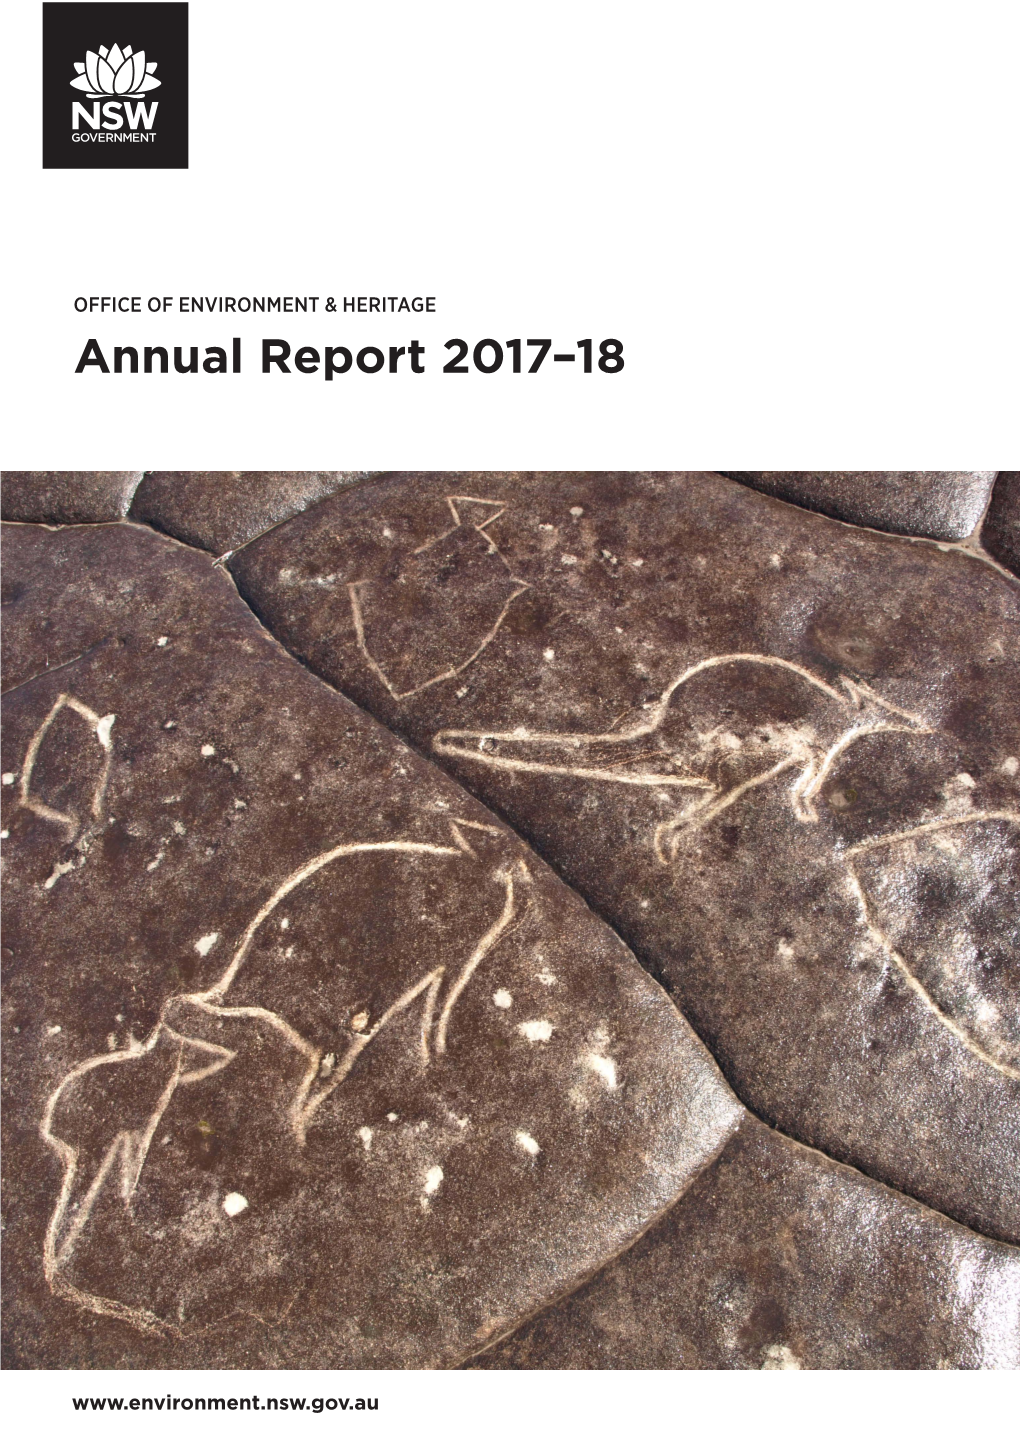 OEH Annual Report 2017-18